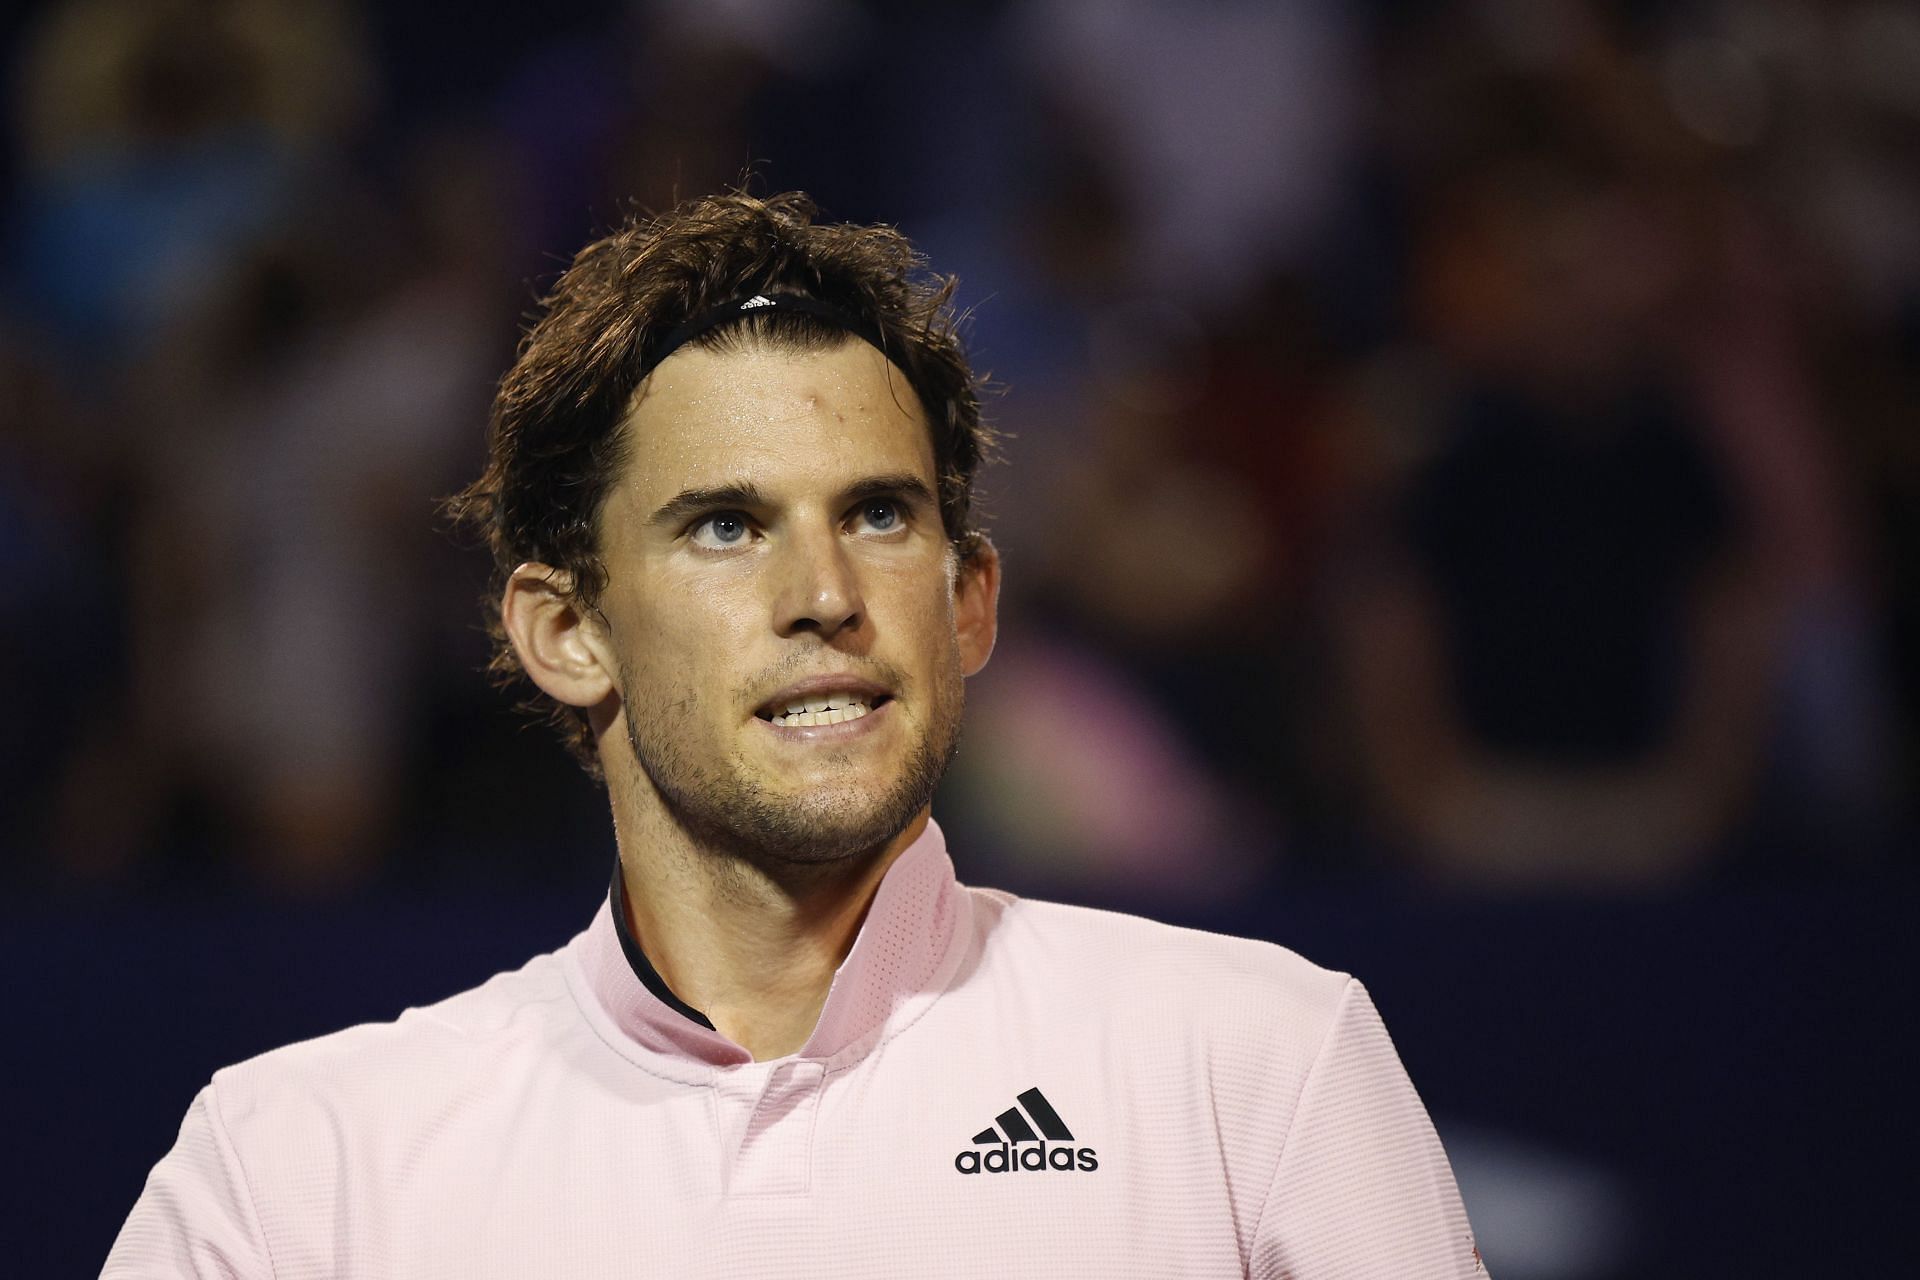 Dominic Thiem lost in the second round against Daniil Medvedev